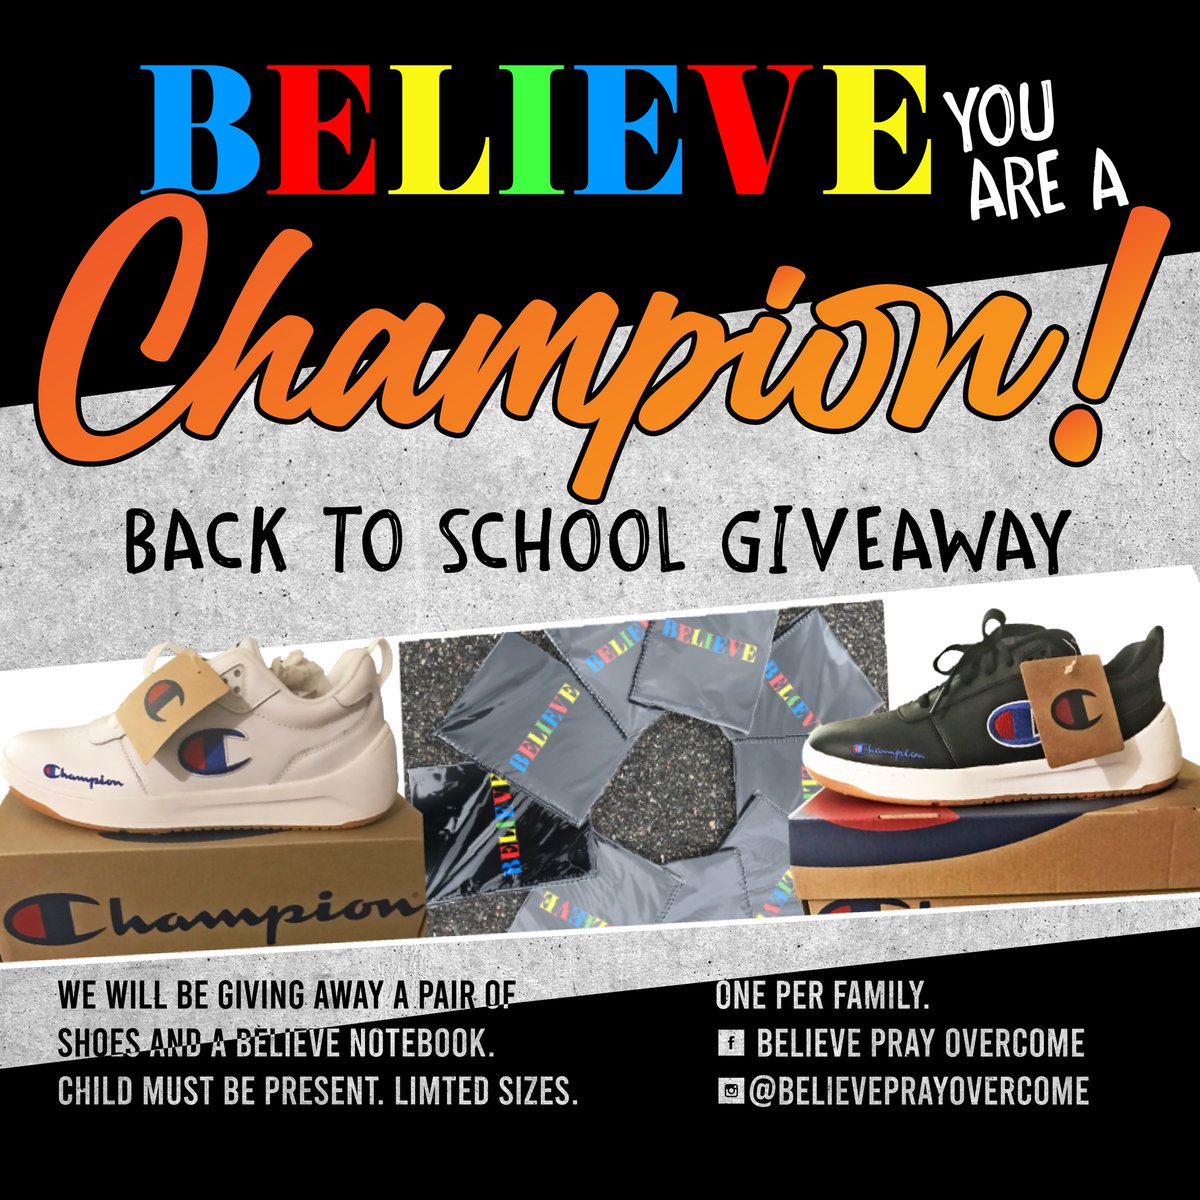 “Your Life Matters” Rally hosted by Vision Driven 757 at Grove Church today 3pm-6pm. We will be giving away Champion shoes ranging in sizes 4.5-7 and some notebooks. Limited supply. First come. One pair per family. Child must be present. #BelievePrayOvercome #VisionDriven757